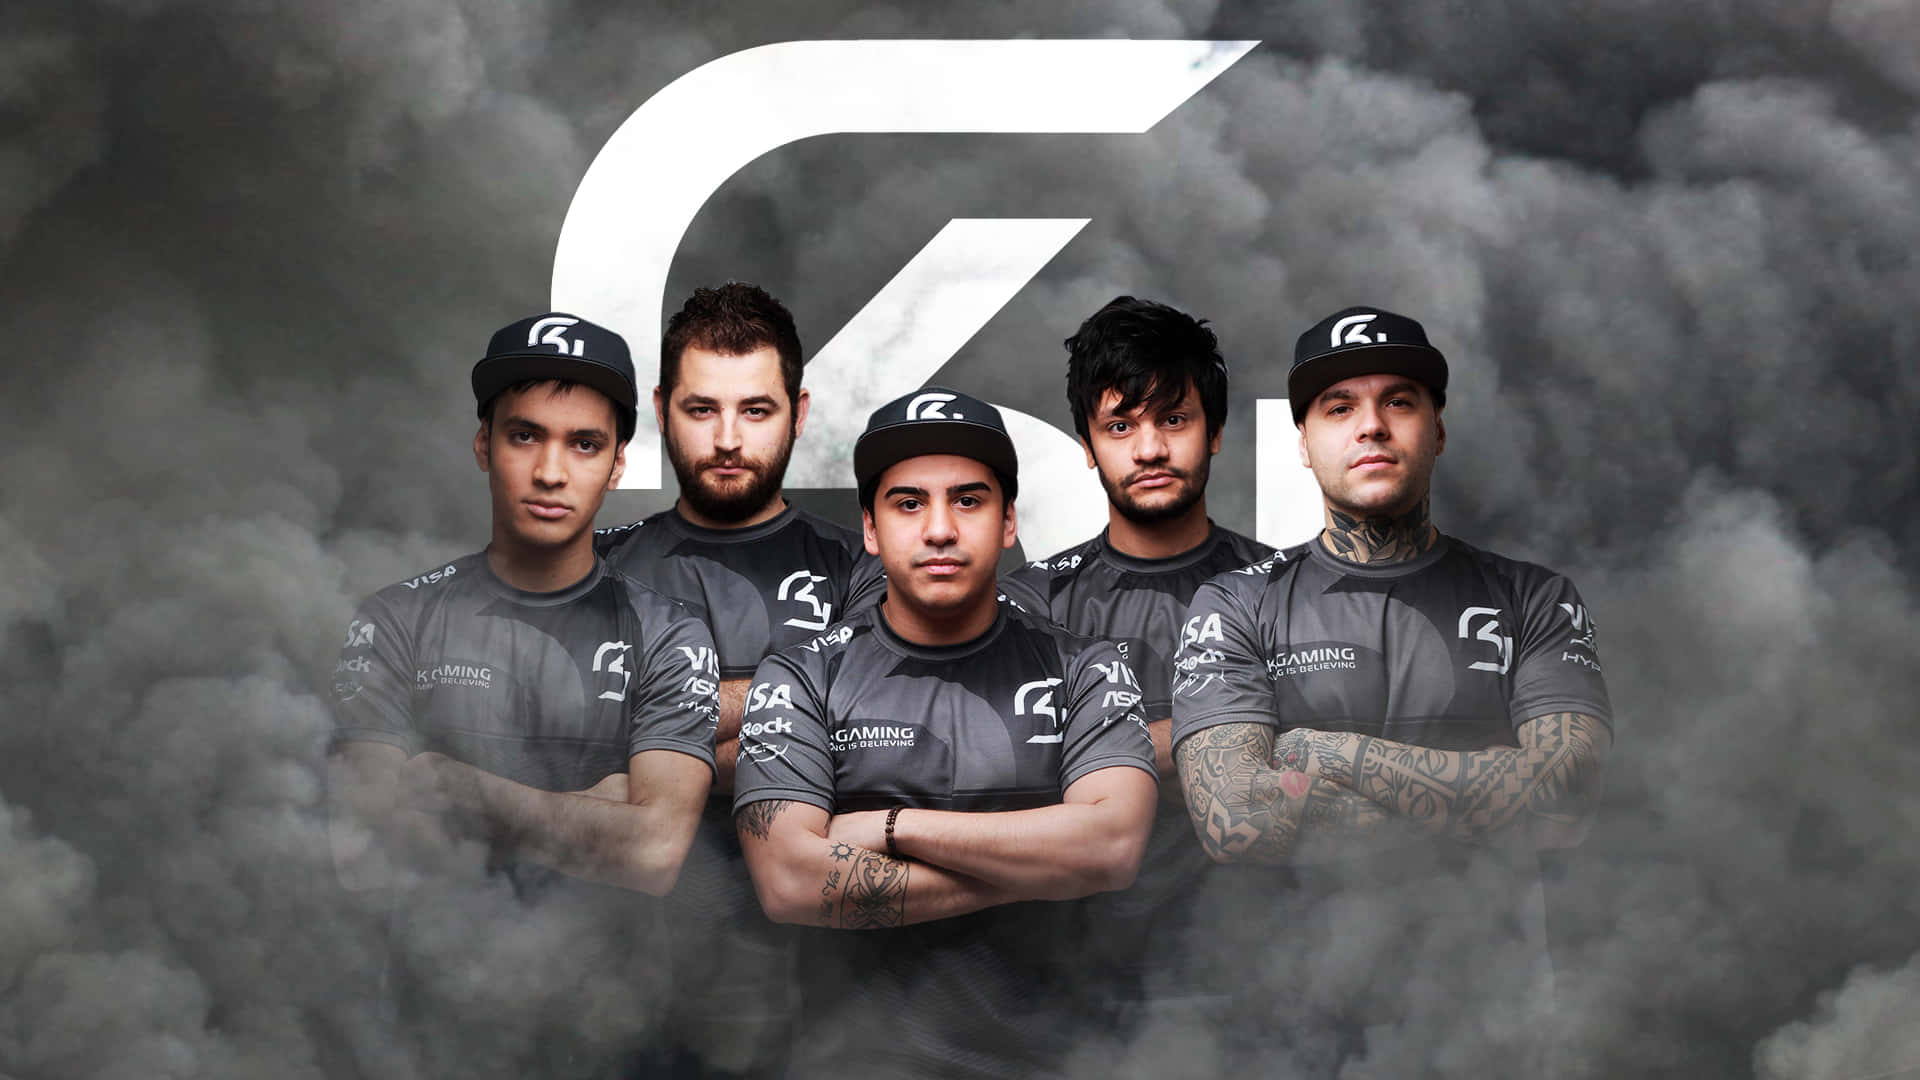 SK Gaming Team in Action on Stage Wallpaper